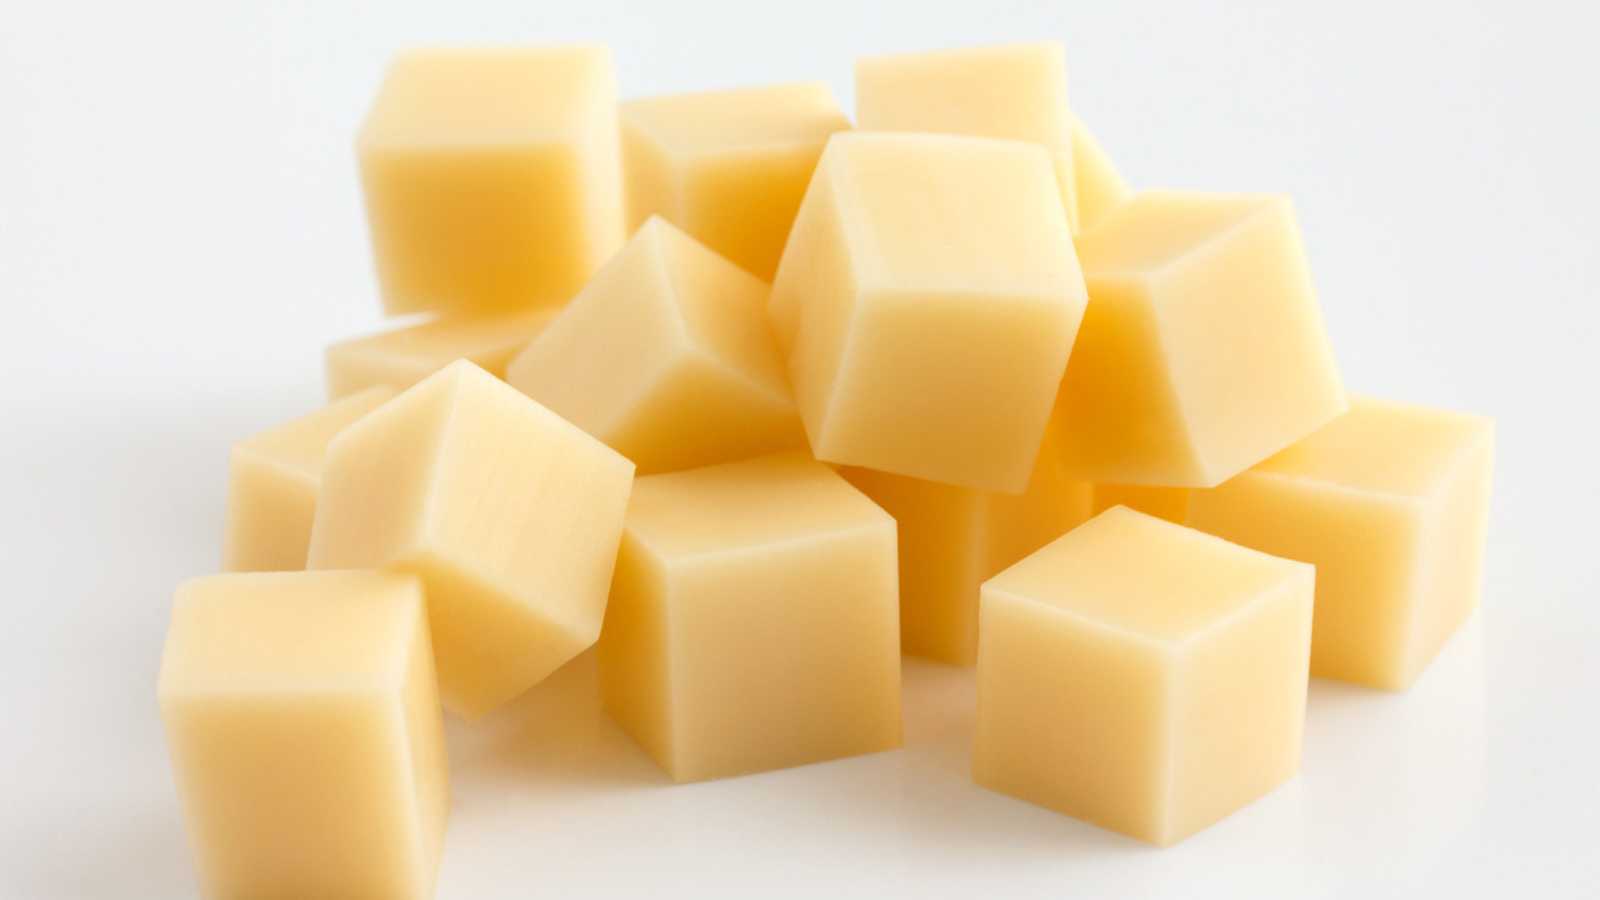 Cheese cubes